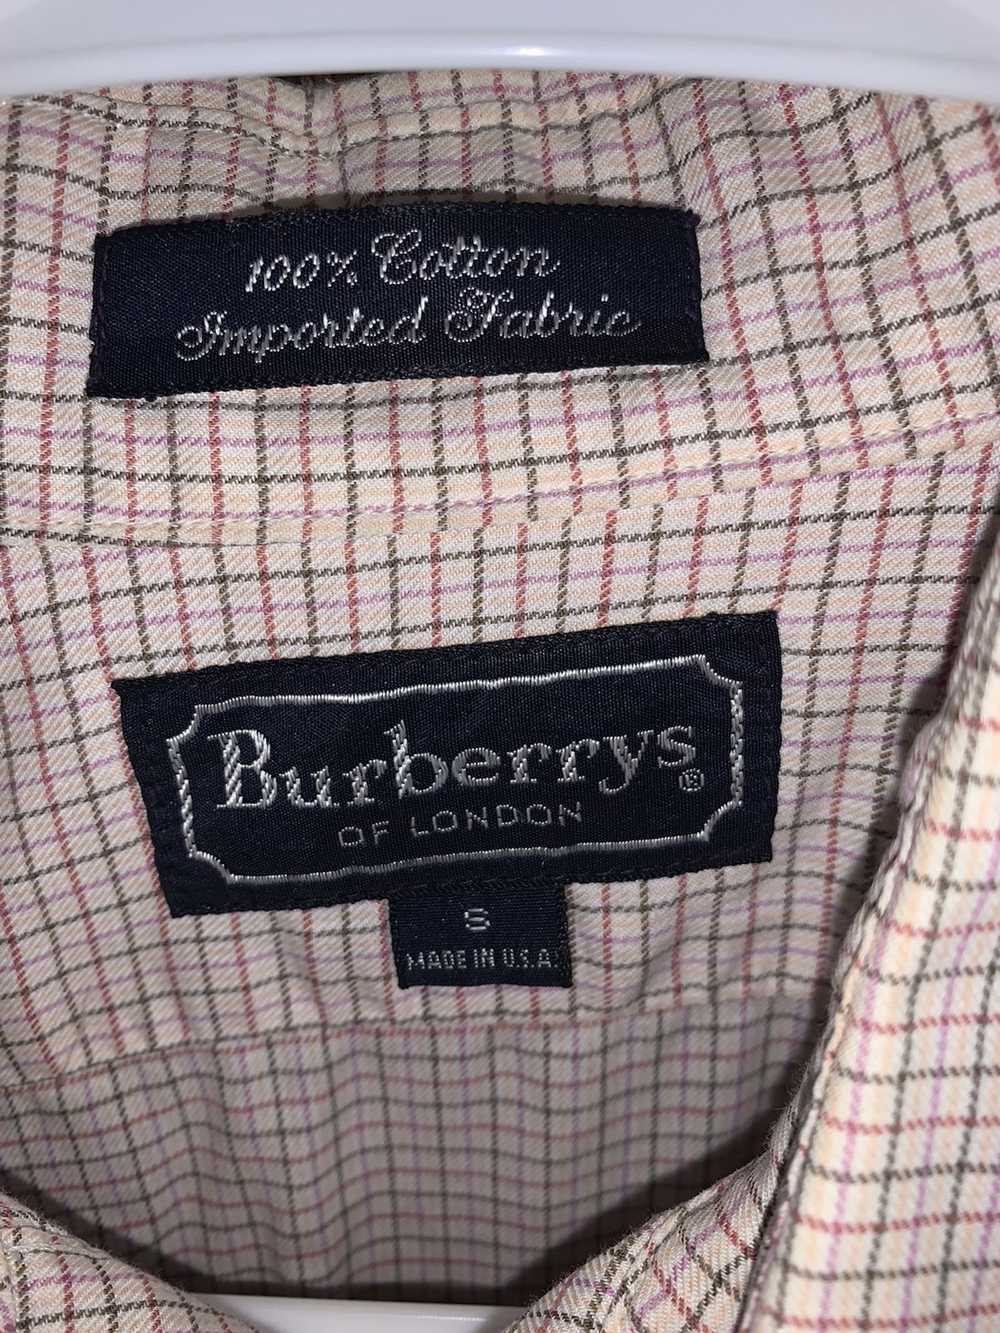 Burberry Burberry long sleeve button up - image 2